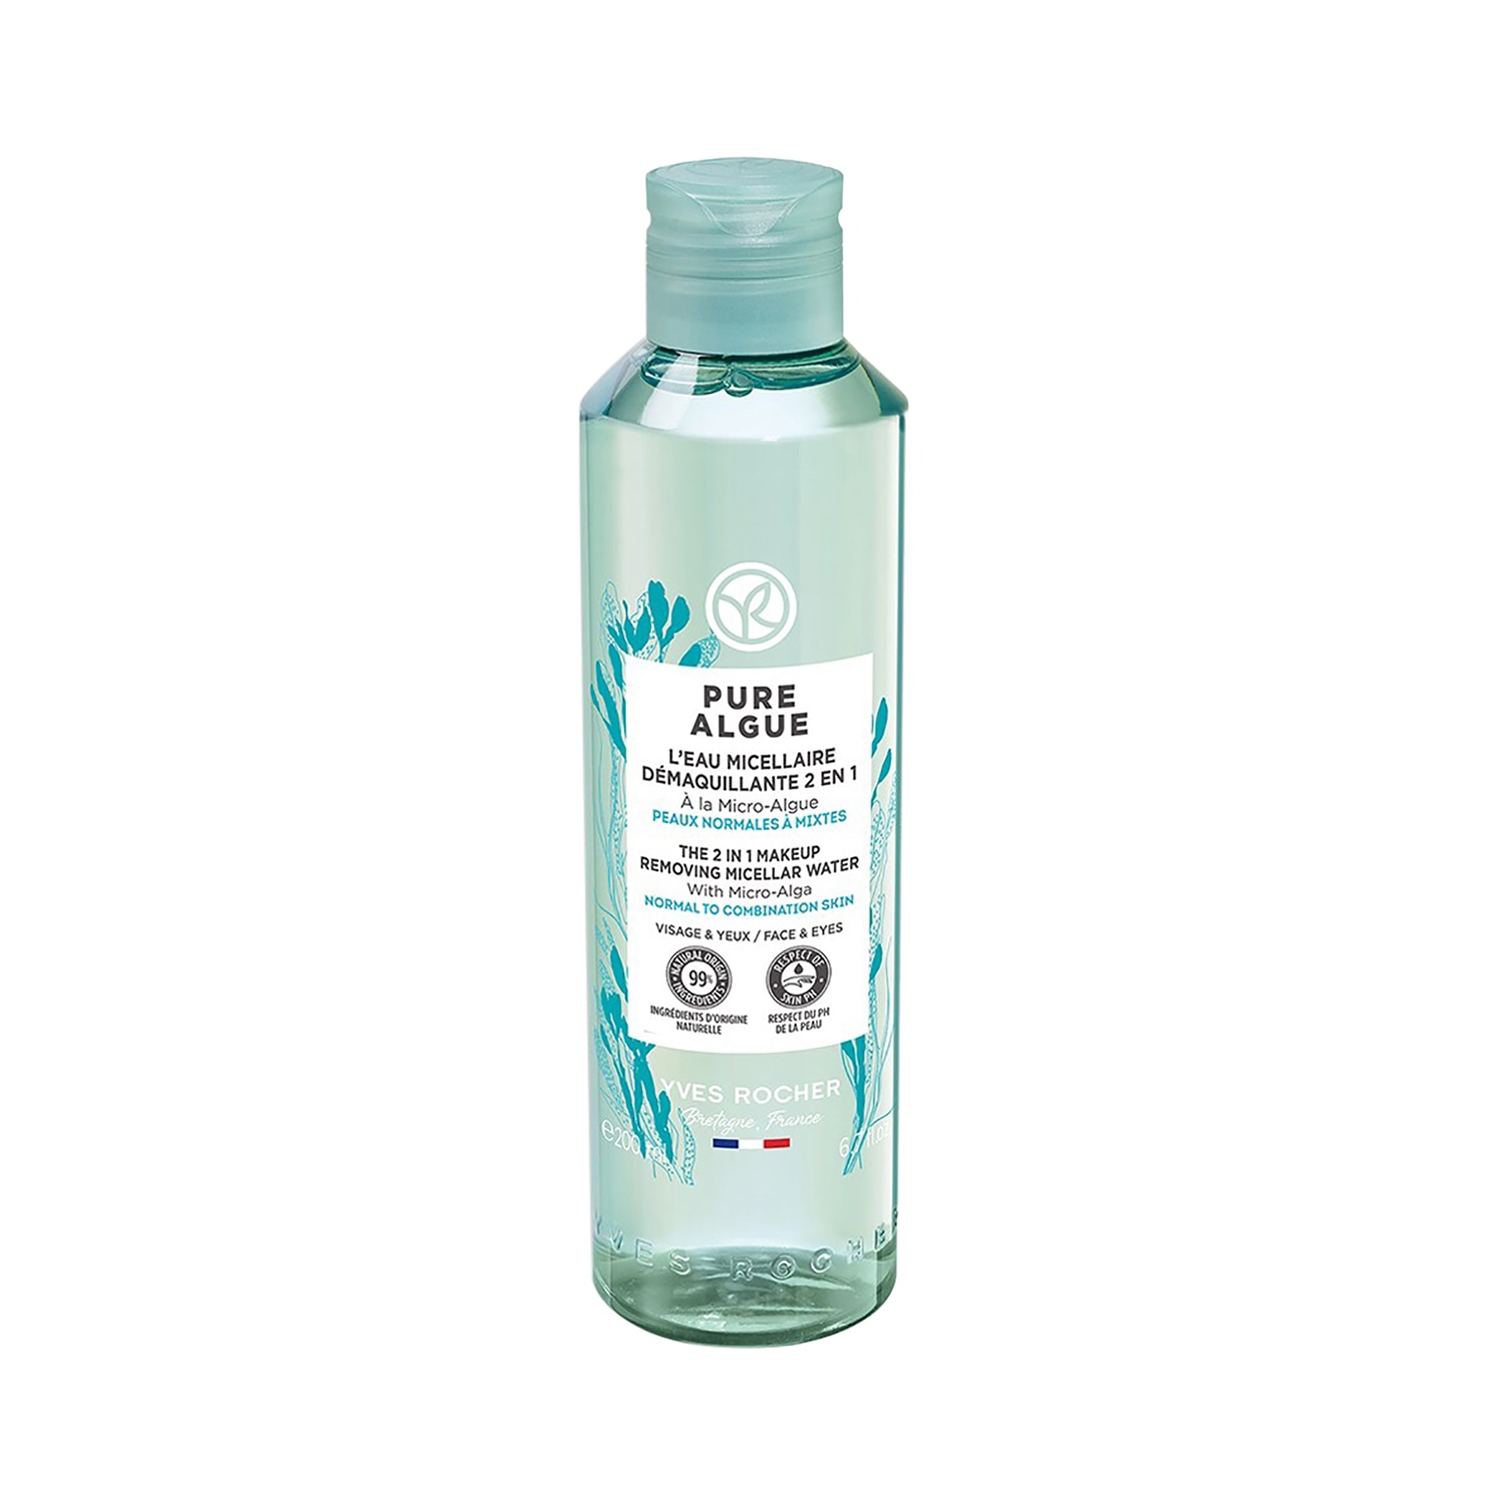 Yves Rocher | Yves Rocher Pure Algue The 2 In 1 Makeup Removing Micellar Water (200ml)